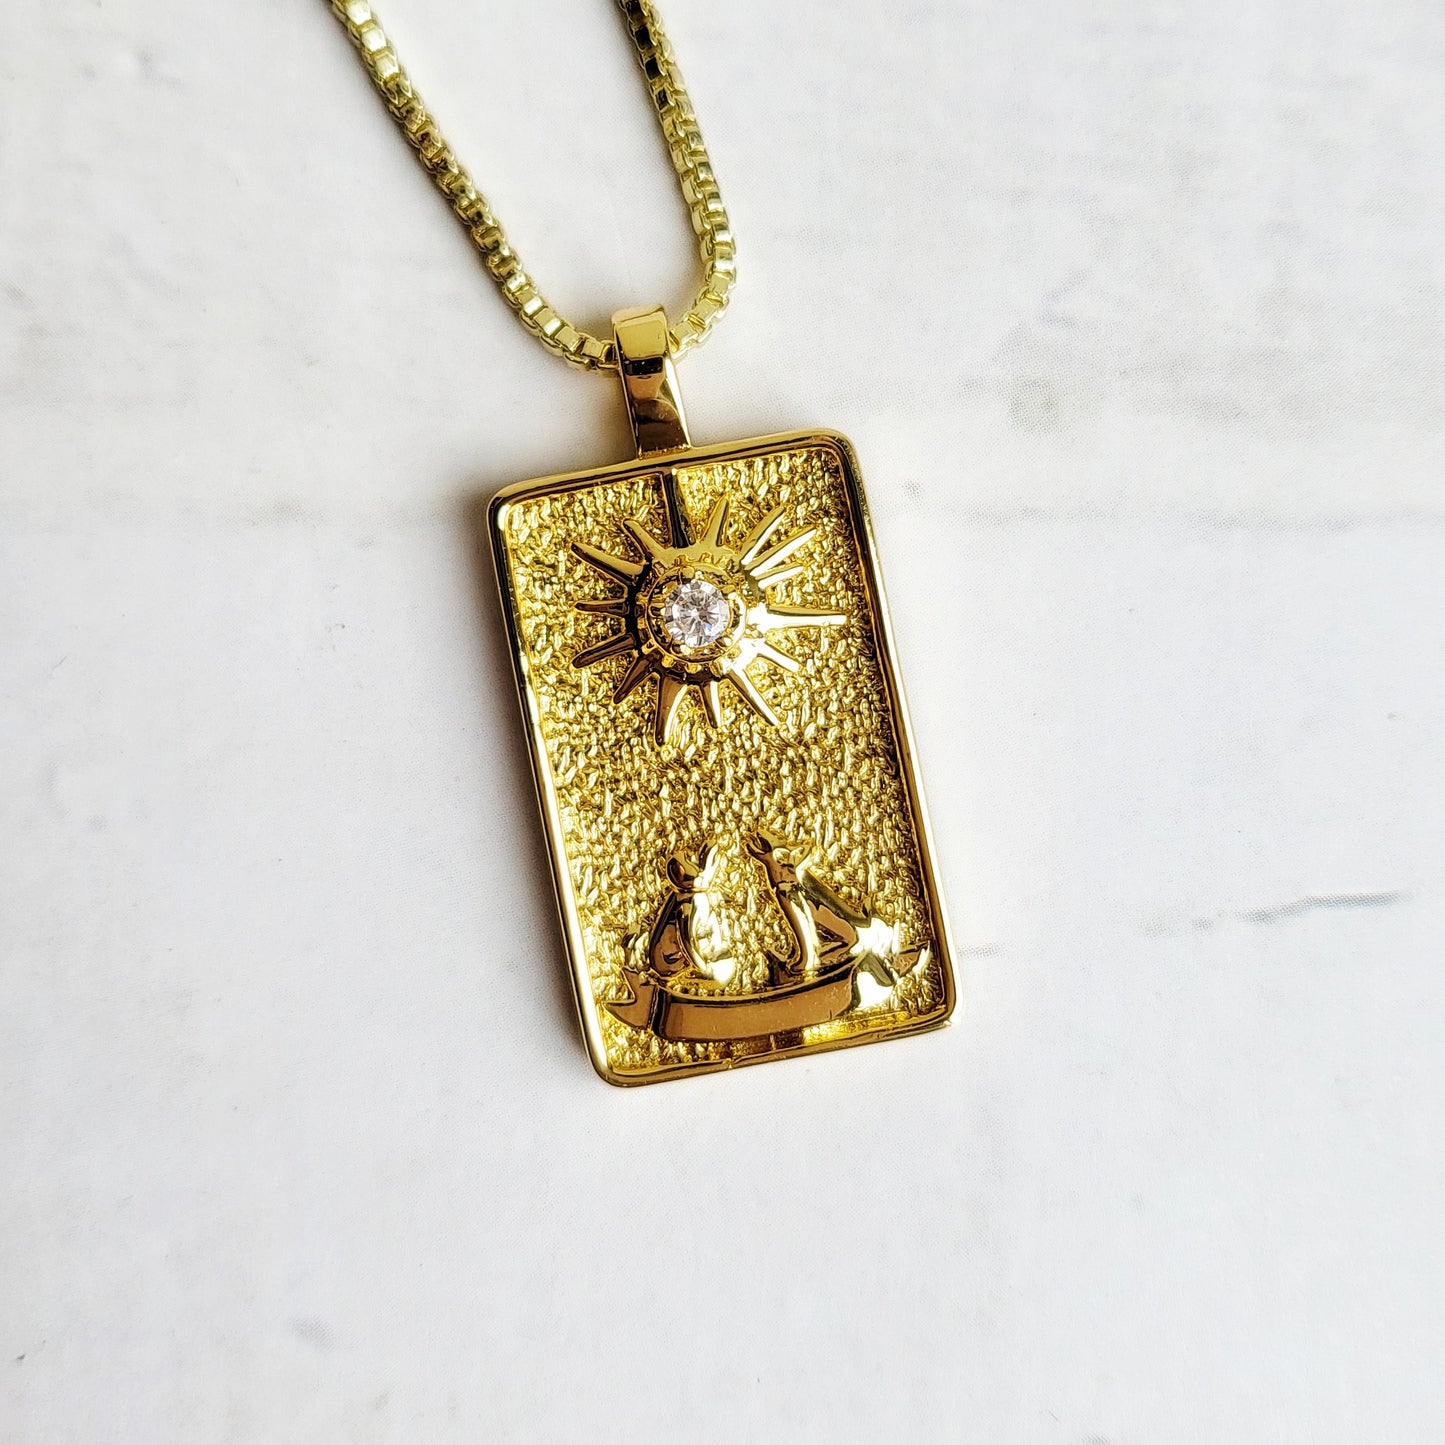 THE MOON Tarot Card |  14K Gold Box Chain Pendant Necklace | Delicate, Minimalist Intention Celestial Necklace | Witchy Astrology Jewelry